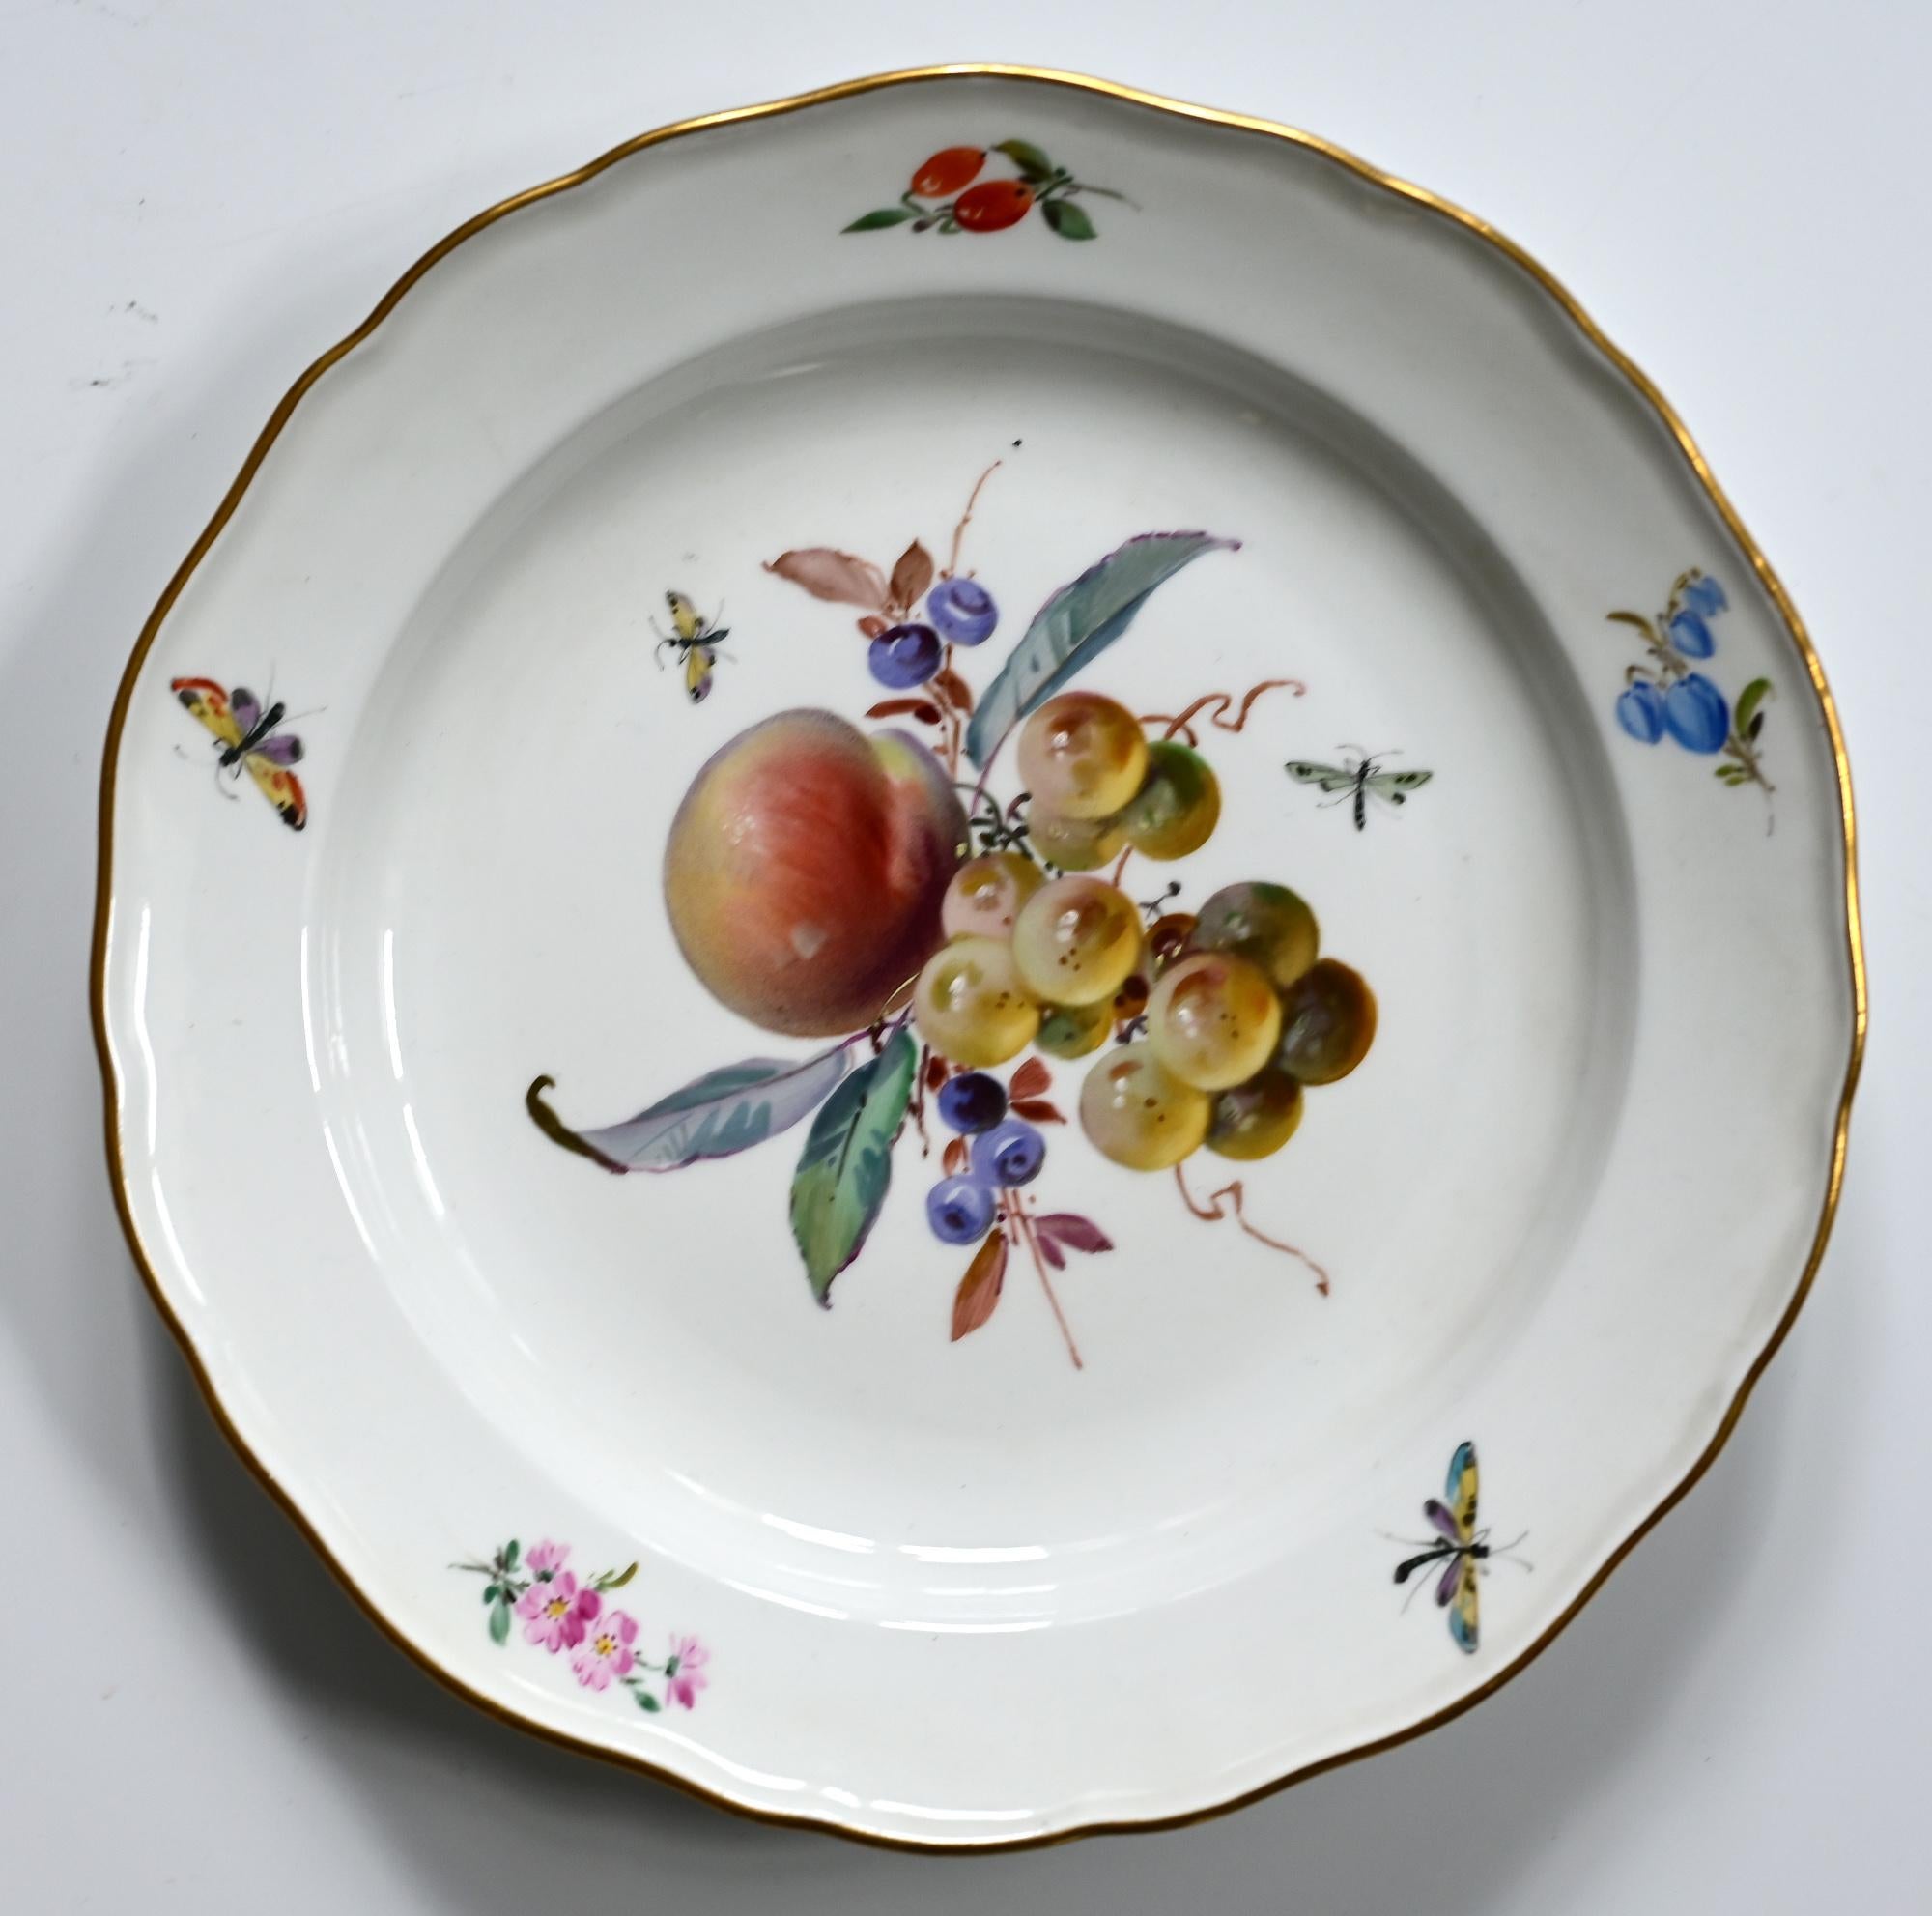 Mid-19th Century Set of 12 Meissen Plates with Fruits, Insects and Flowers 19.Jhdt Porcelain